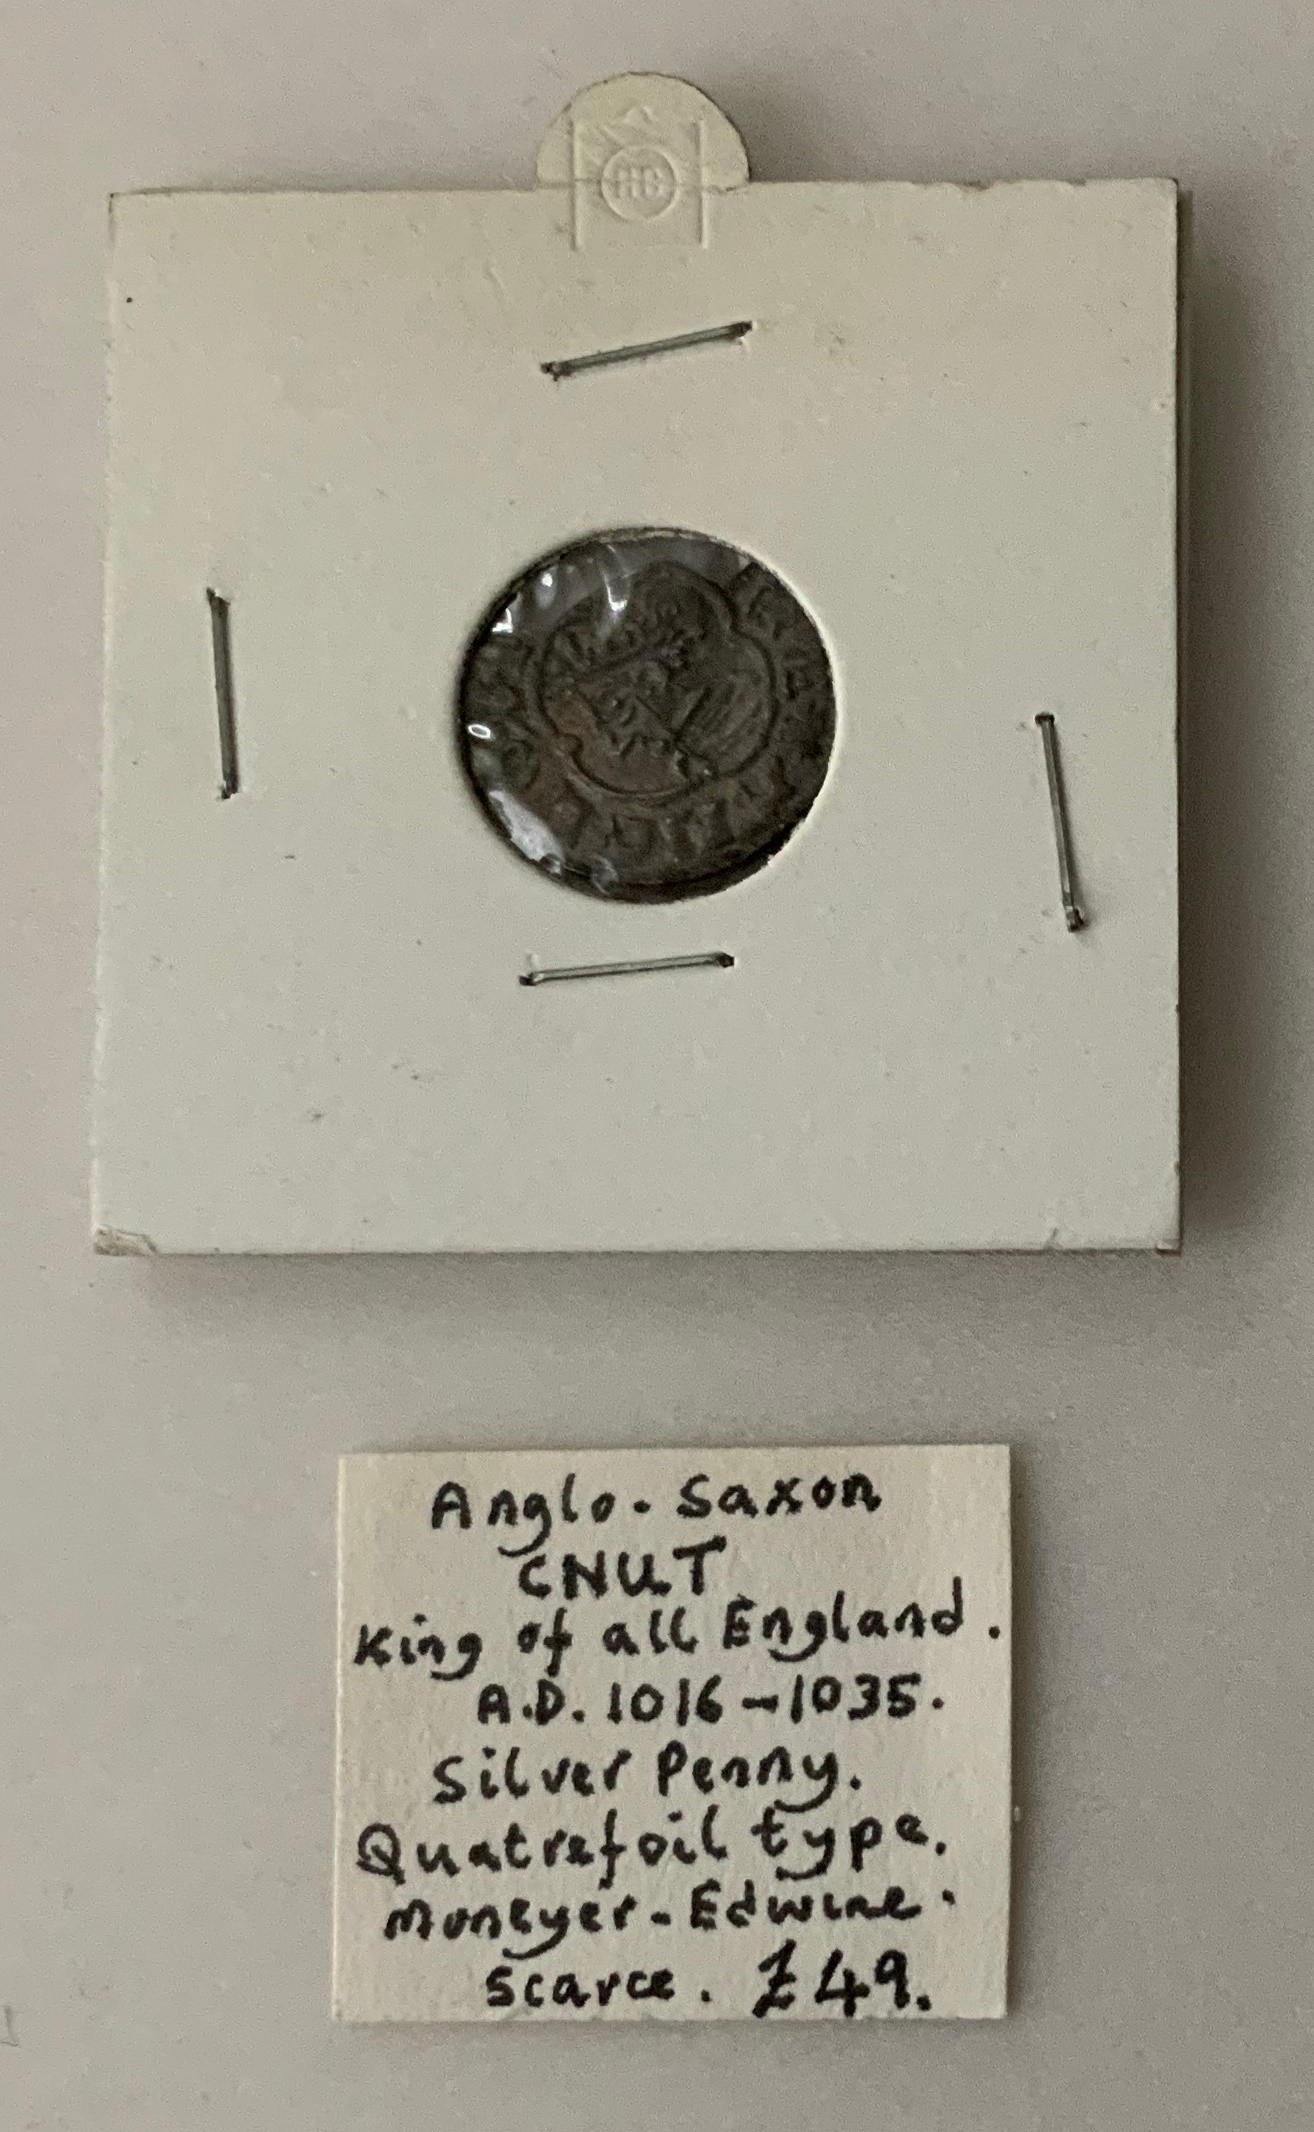 ANGLO SAXON CNUT KING OF ALL ENGLAND A.D. 1016 - 1035 SILVER PENNY